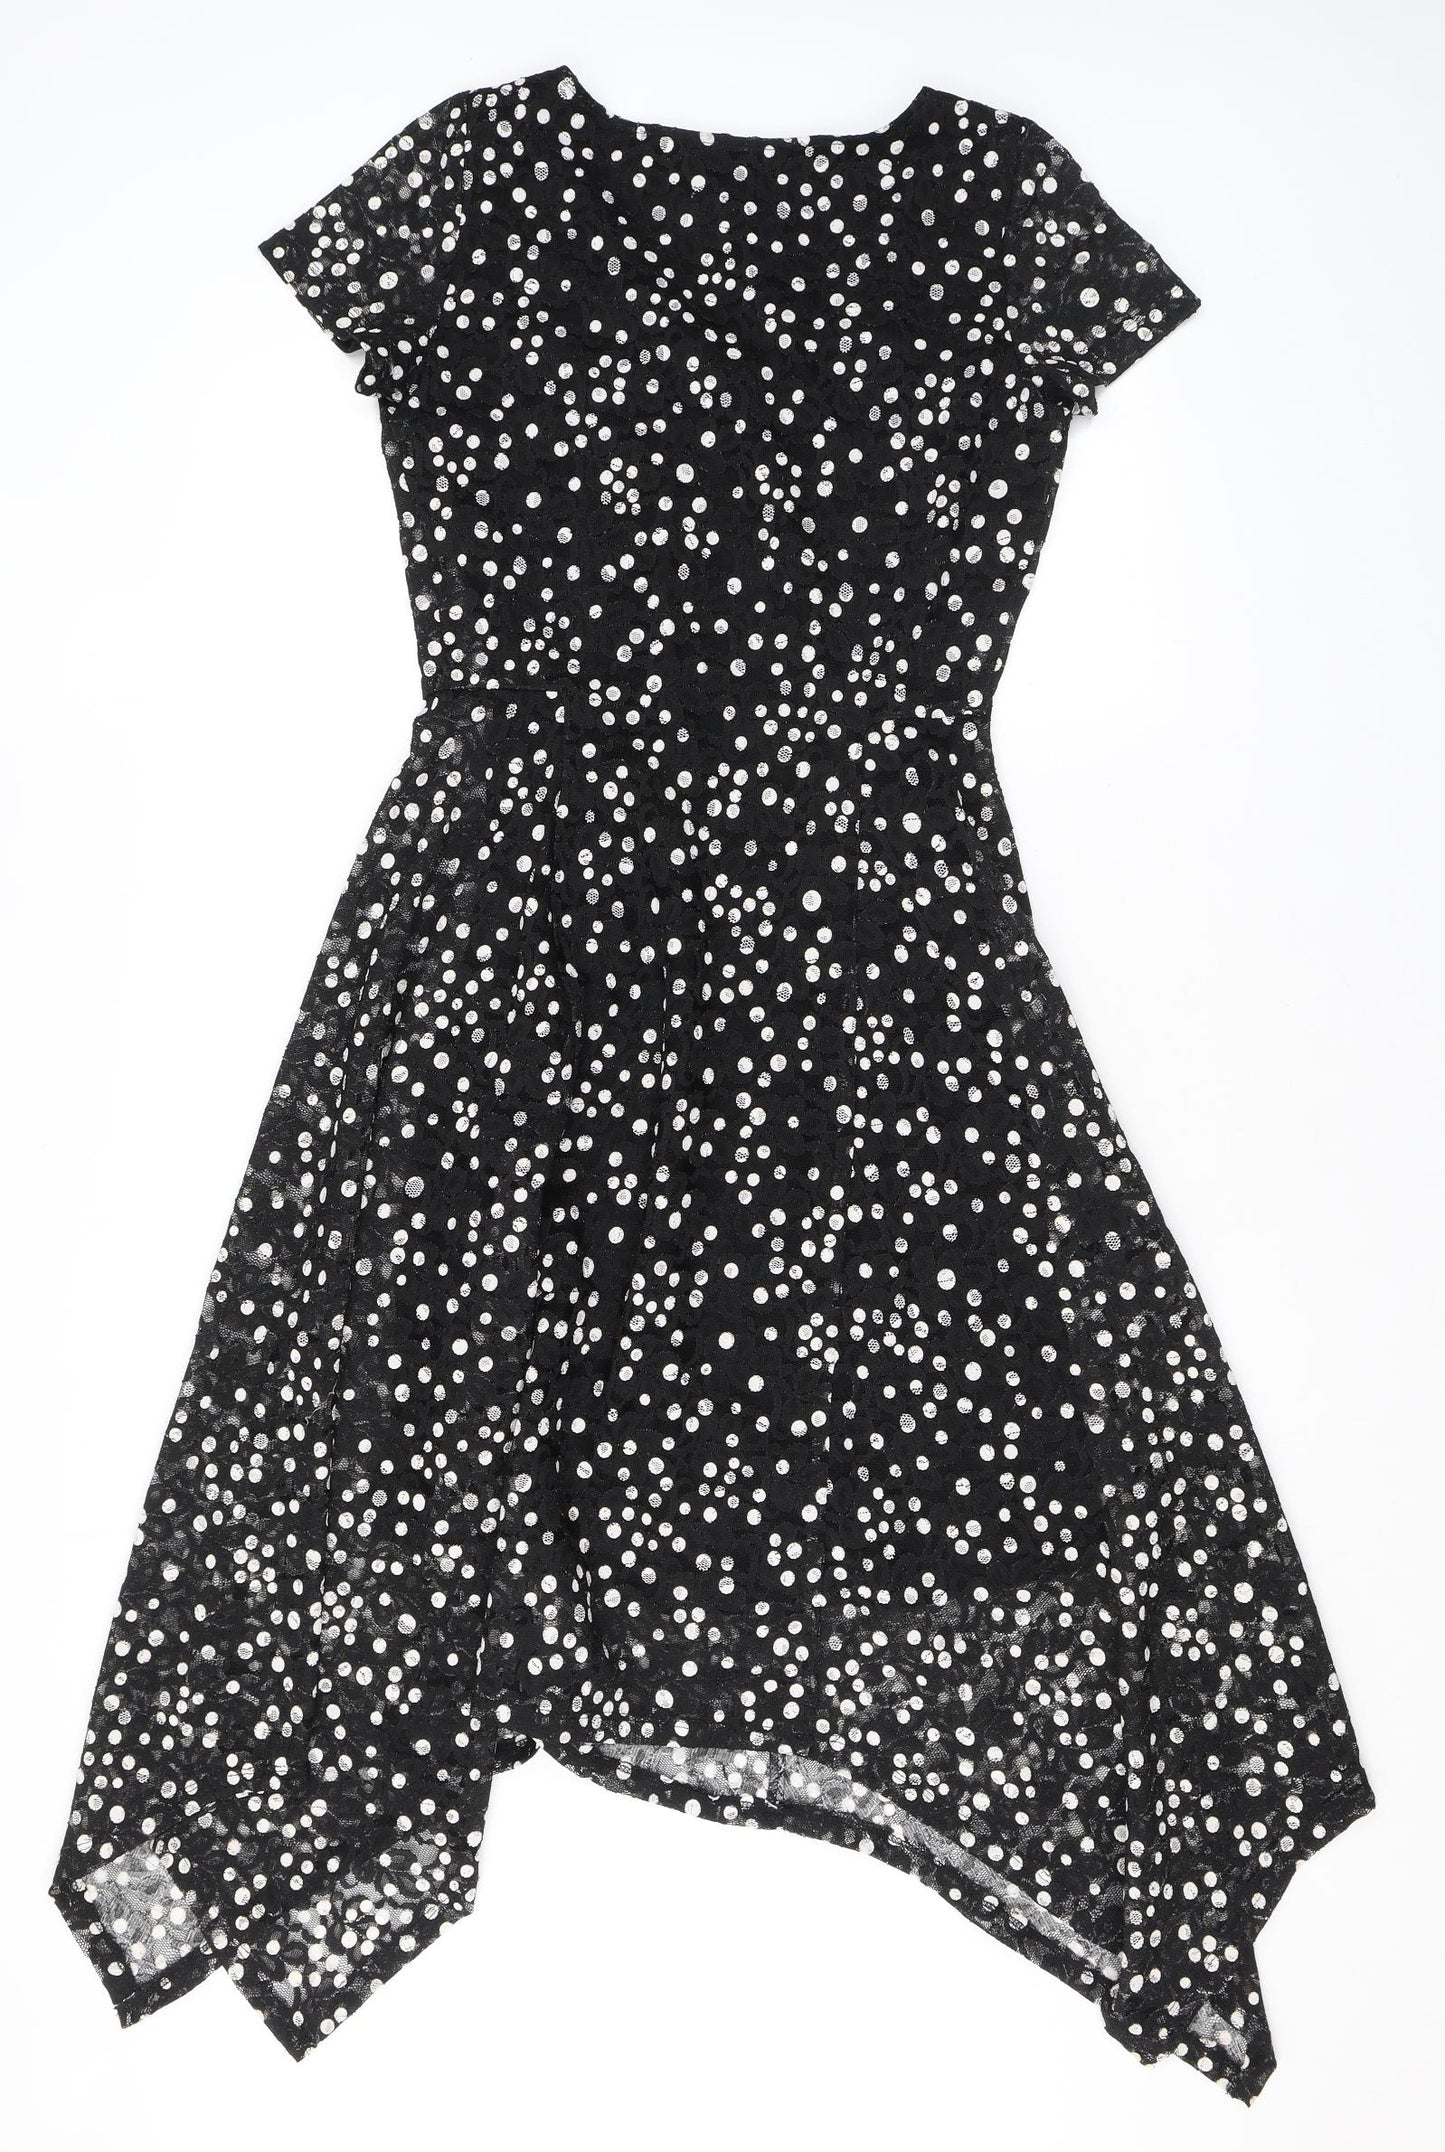 Ronni Nicole Womens Black Polka Dot Polyester Fit & Flare Size 12 V-Neck Pullover